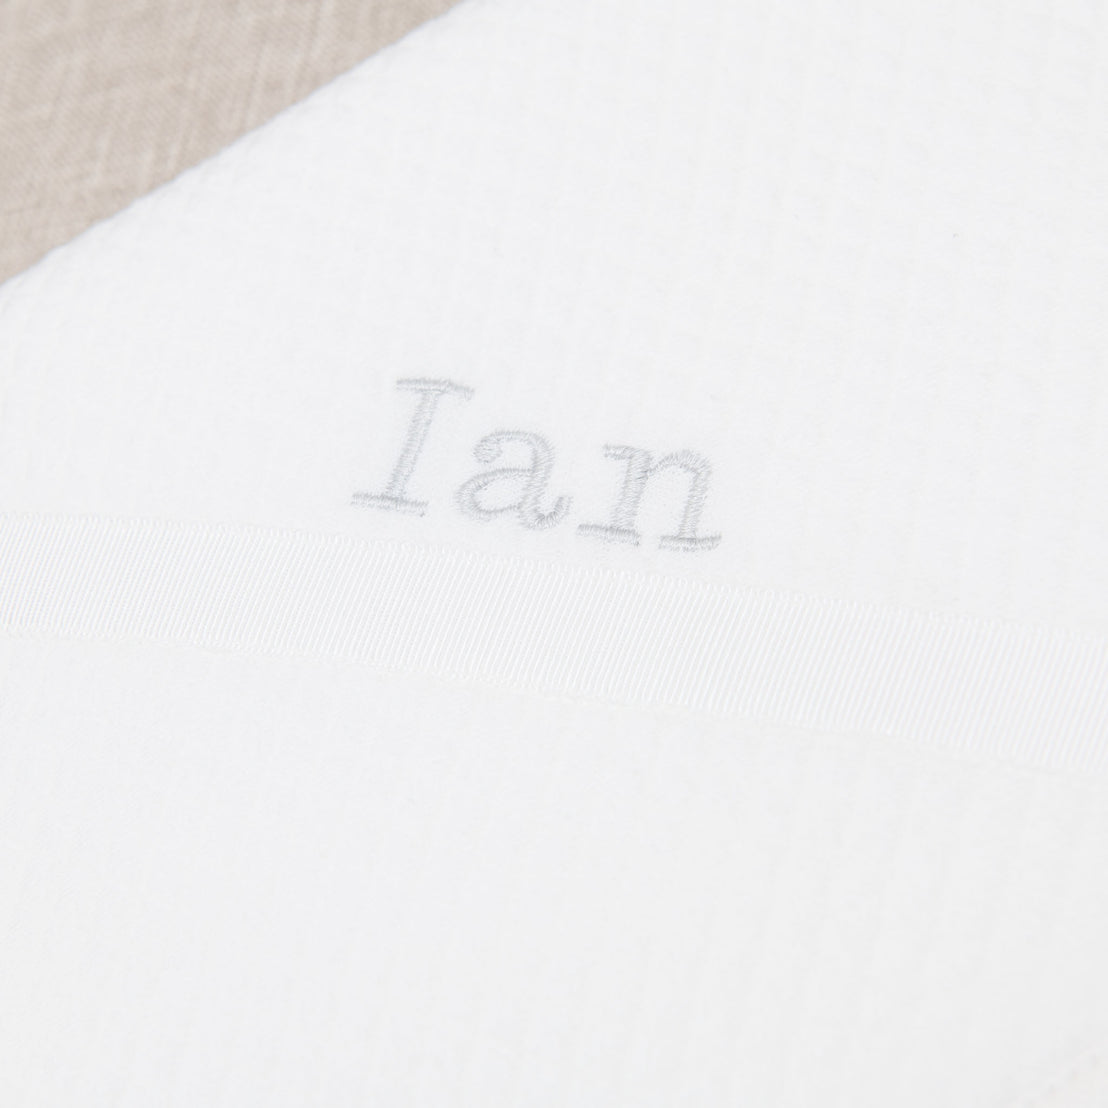 Close-up of a white fabric with the name "Ian" embroidered in gray thread, centered above a horizontal satin ribbon on the Ian Personalized Blanket in a traditional designer style.